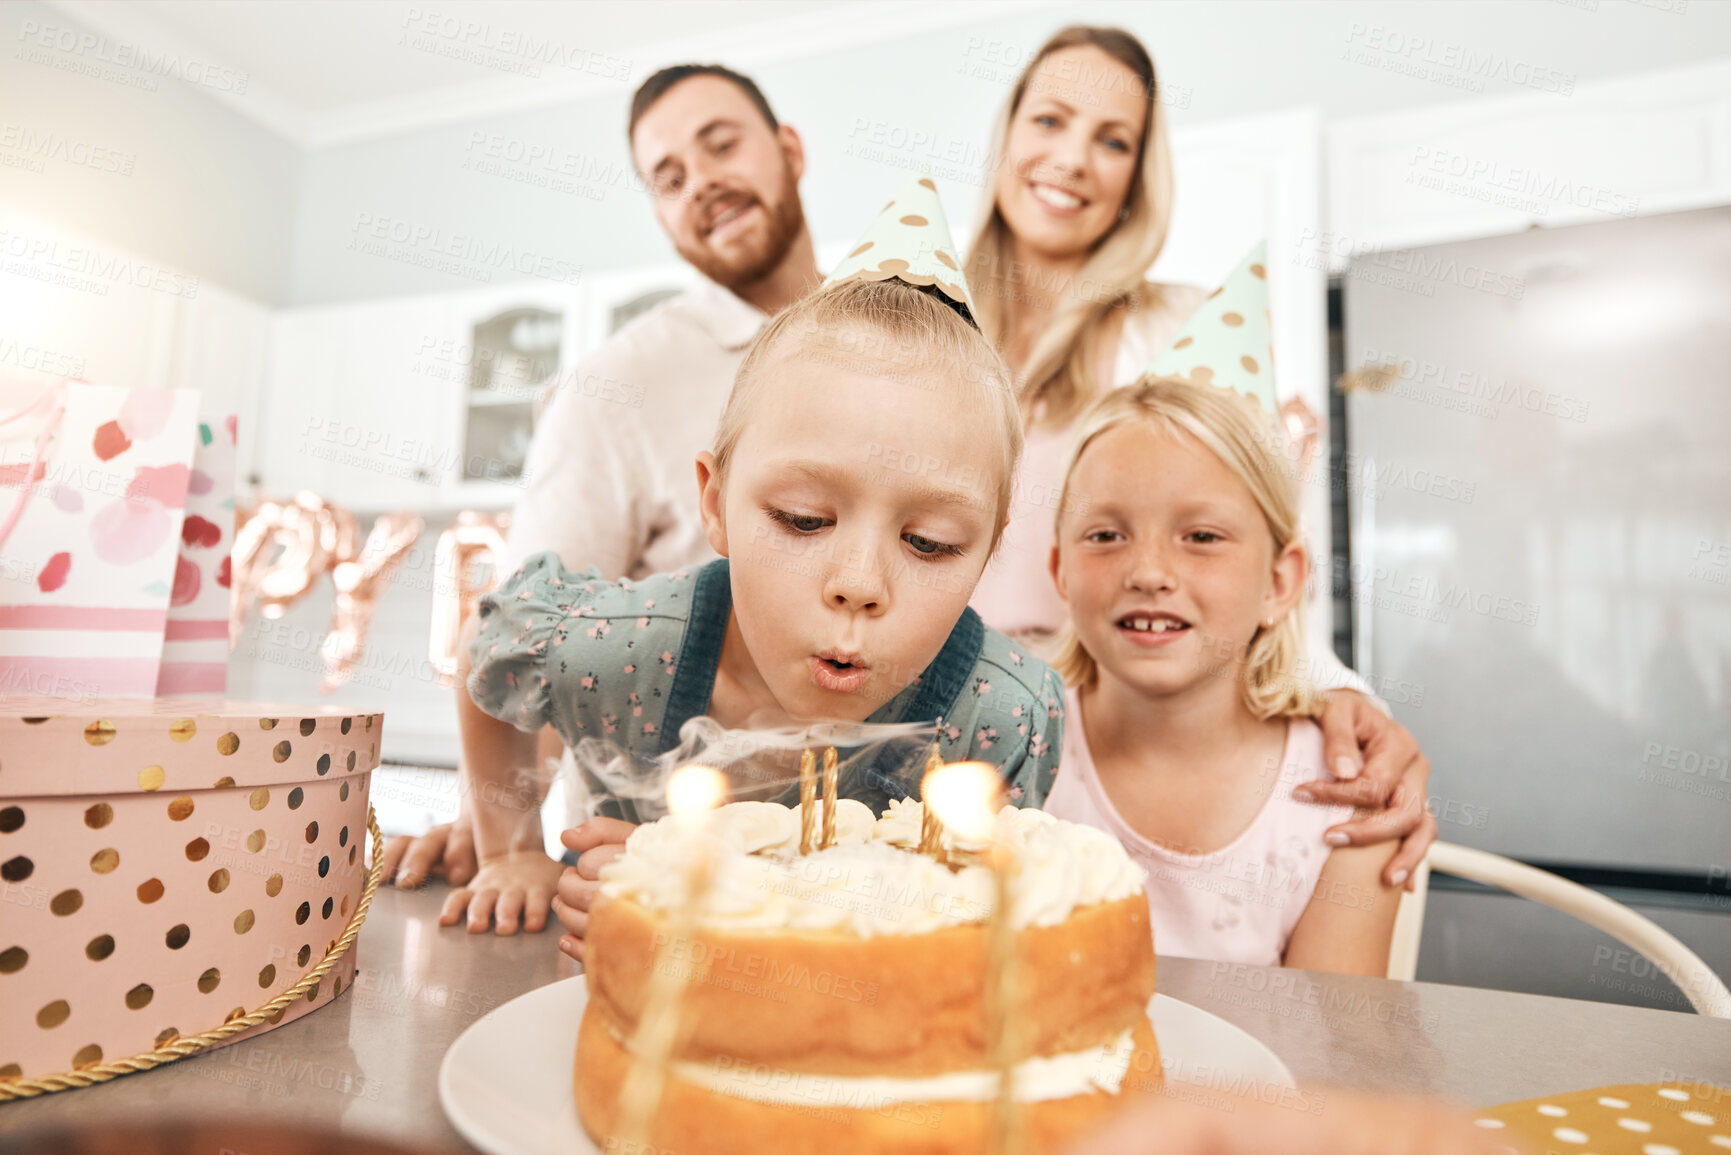 Buy stock photo Children birthday party, cake and candles for blowing out with mother, father or sister in home kitchen. Fun, excited or happy kids celebrating, enjoying and having fun with parents on special event